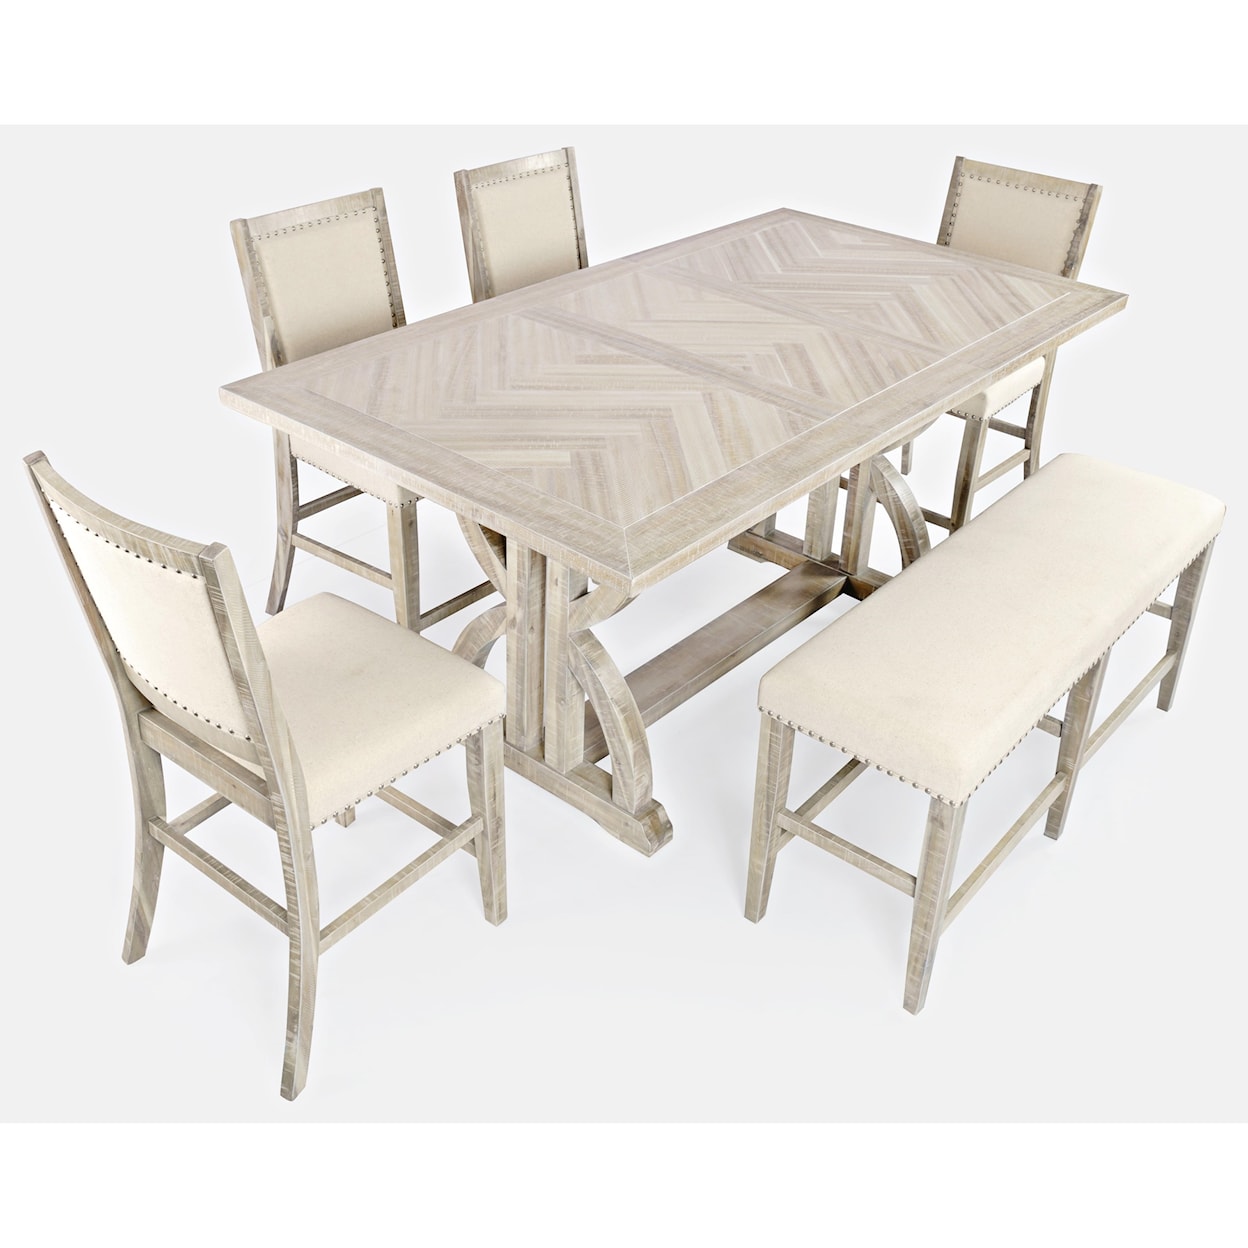 Jofran Fairview 6-Piece Counter Table and Chair Set